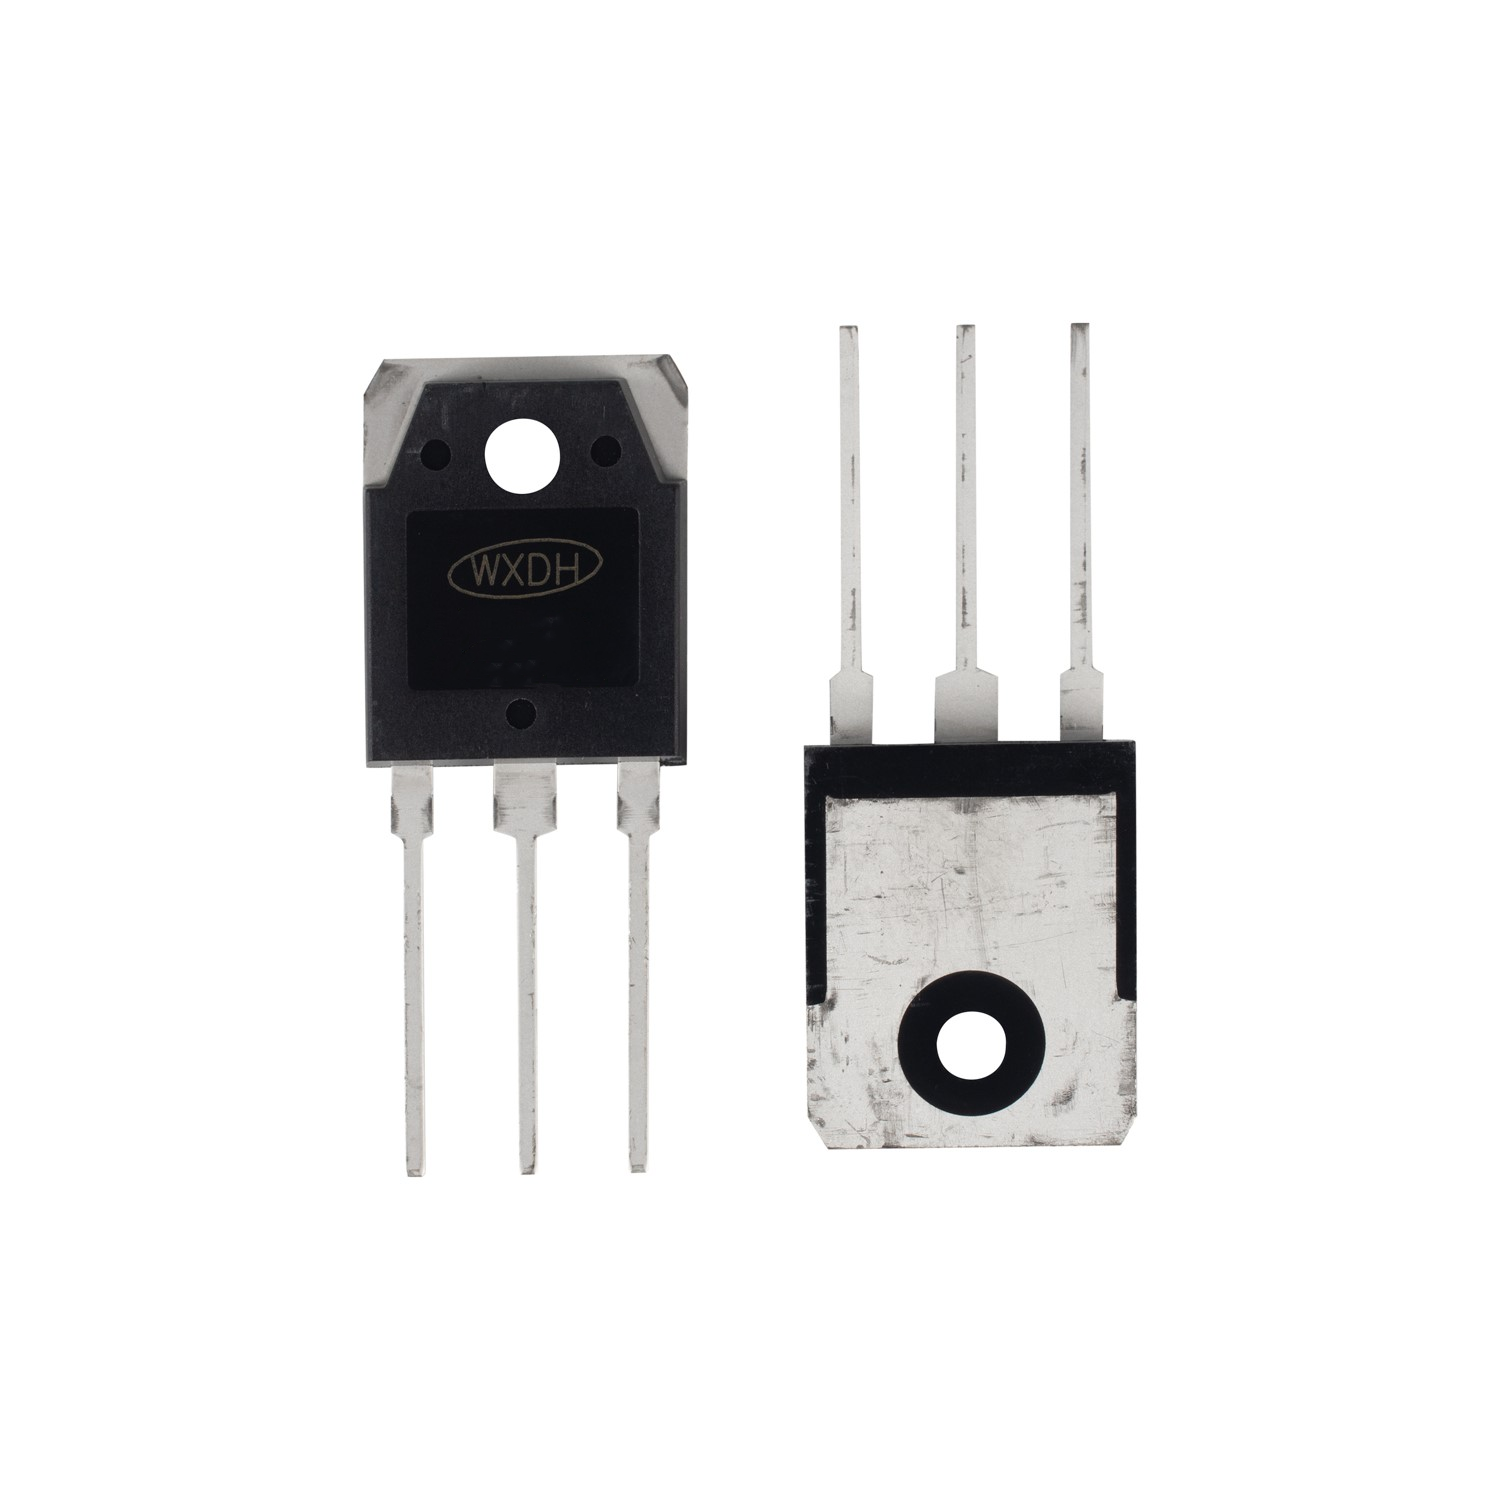 60A 600V Fast recovery diode MUR60FU60NCT TO-3PN